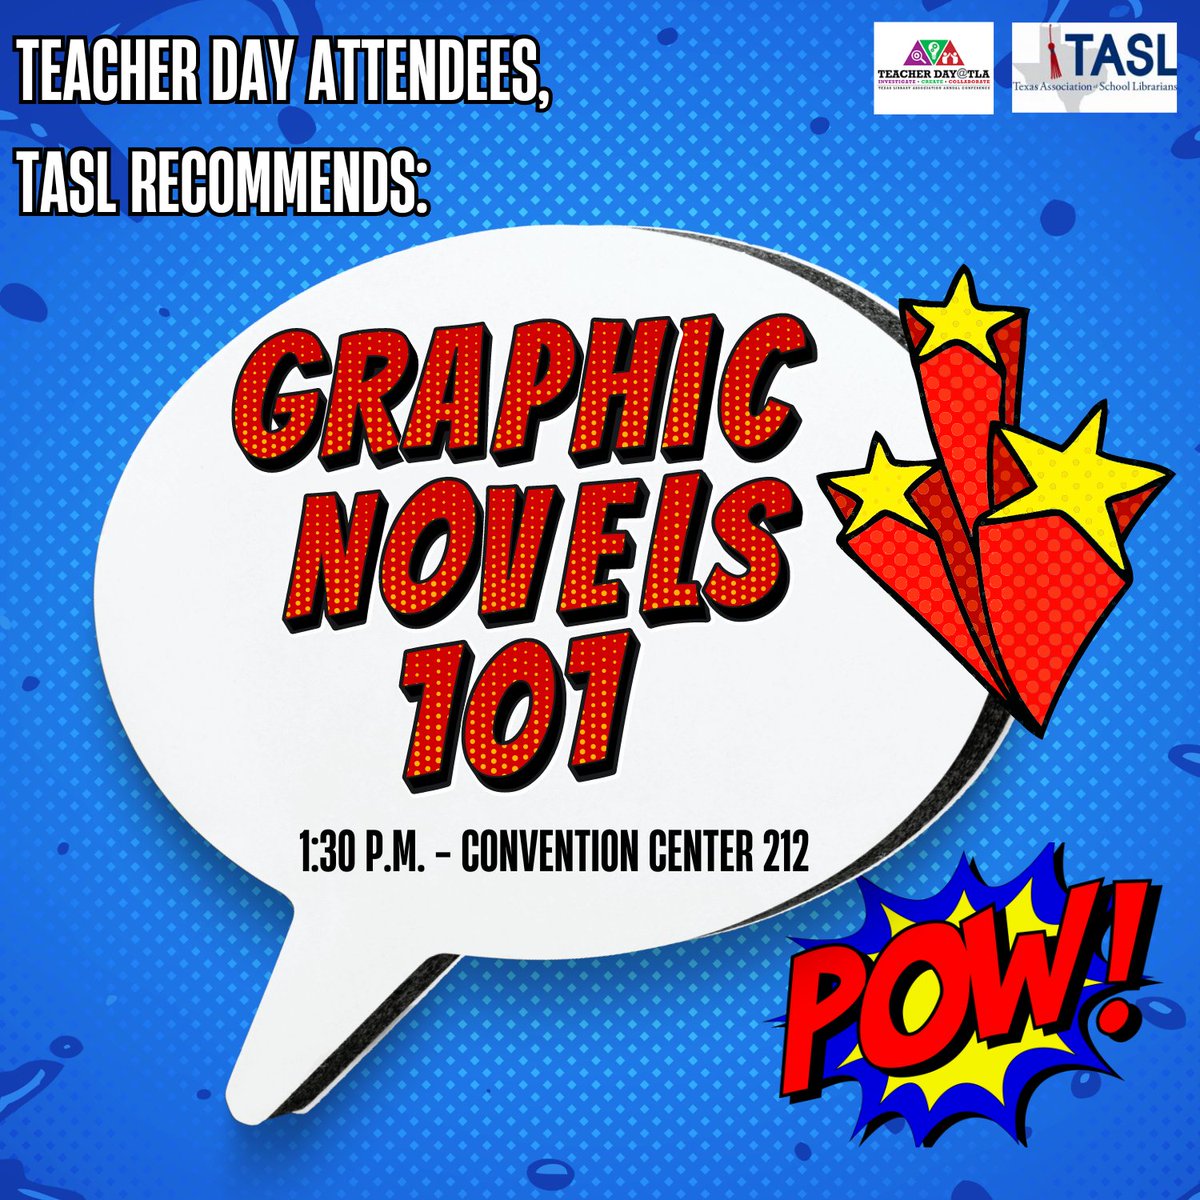 📚 Excited to join #TxLA24 for a session on embracing graphic novels in K-12 programming! 🎨 Dive into the evolution of comics, aligning with TEKS, and advocacy strategies for parents & teachers. @TxASL @TxLA #TDTLA24